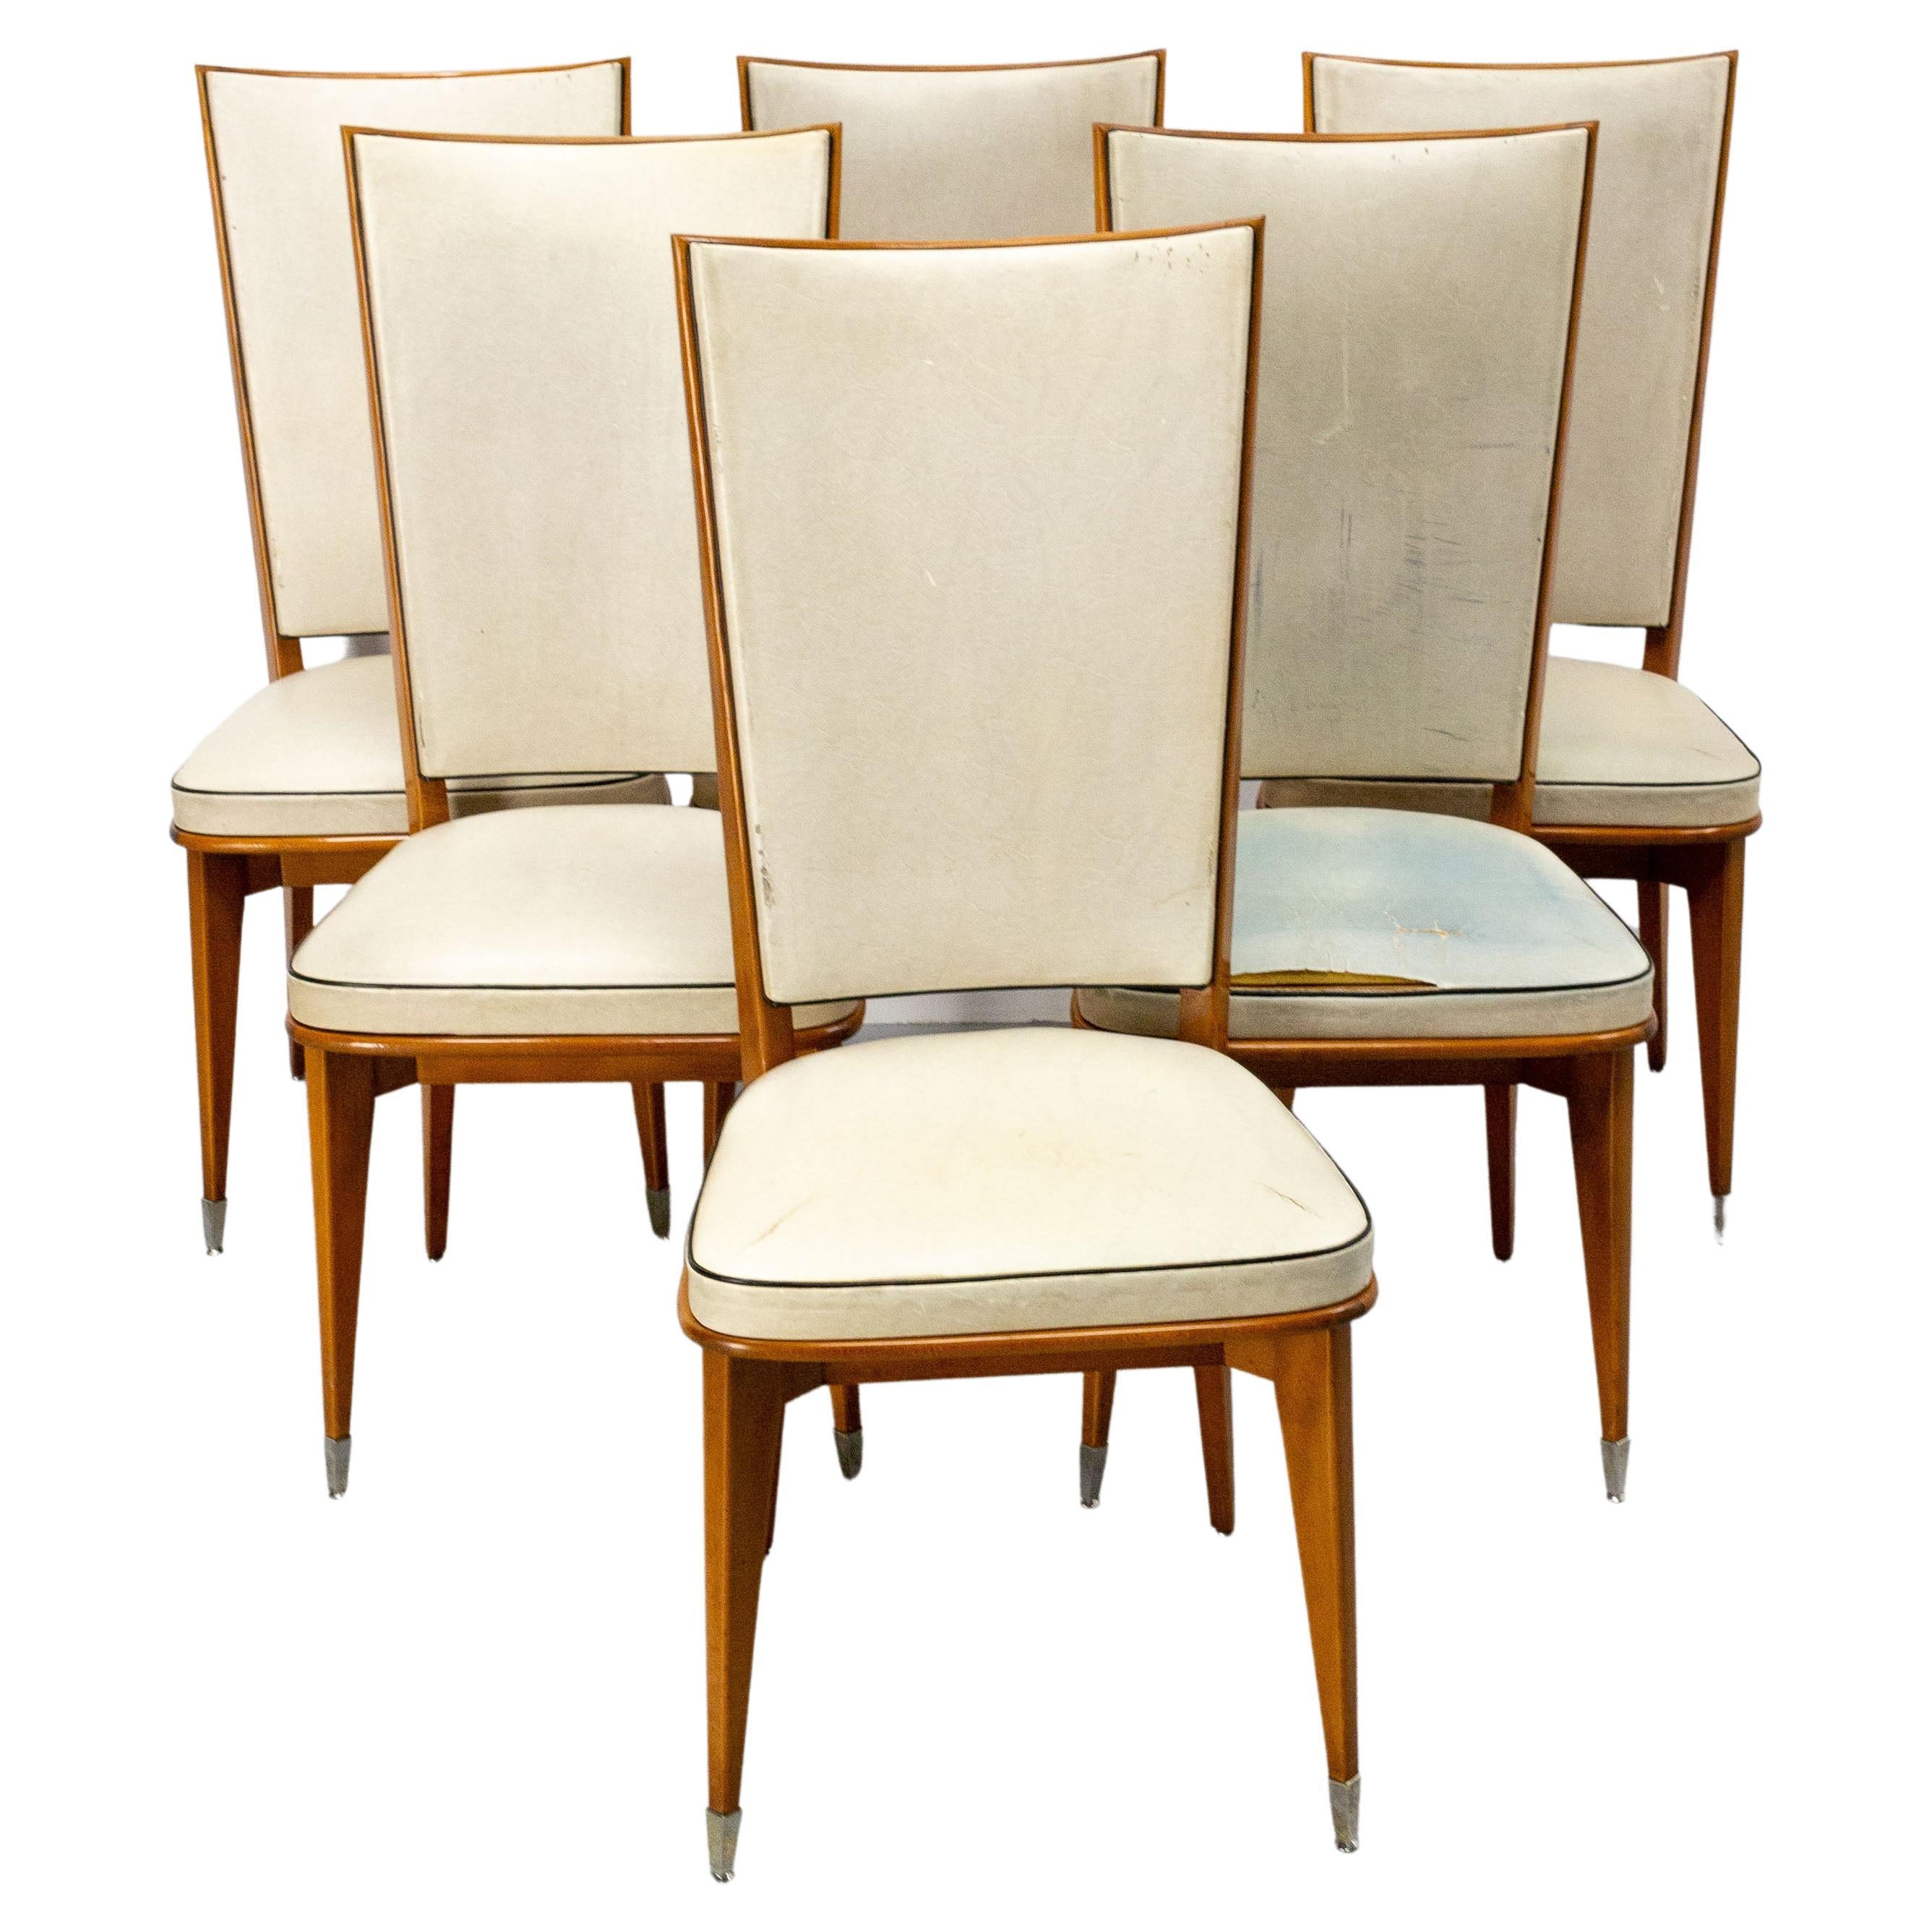 Six Dining Chairs Beech and Skai to Recover Midcentury French, circa 1950